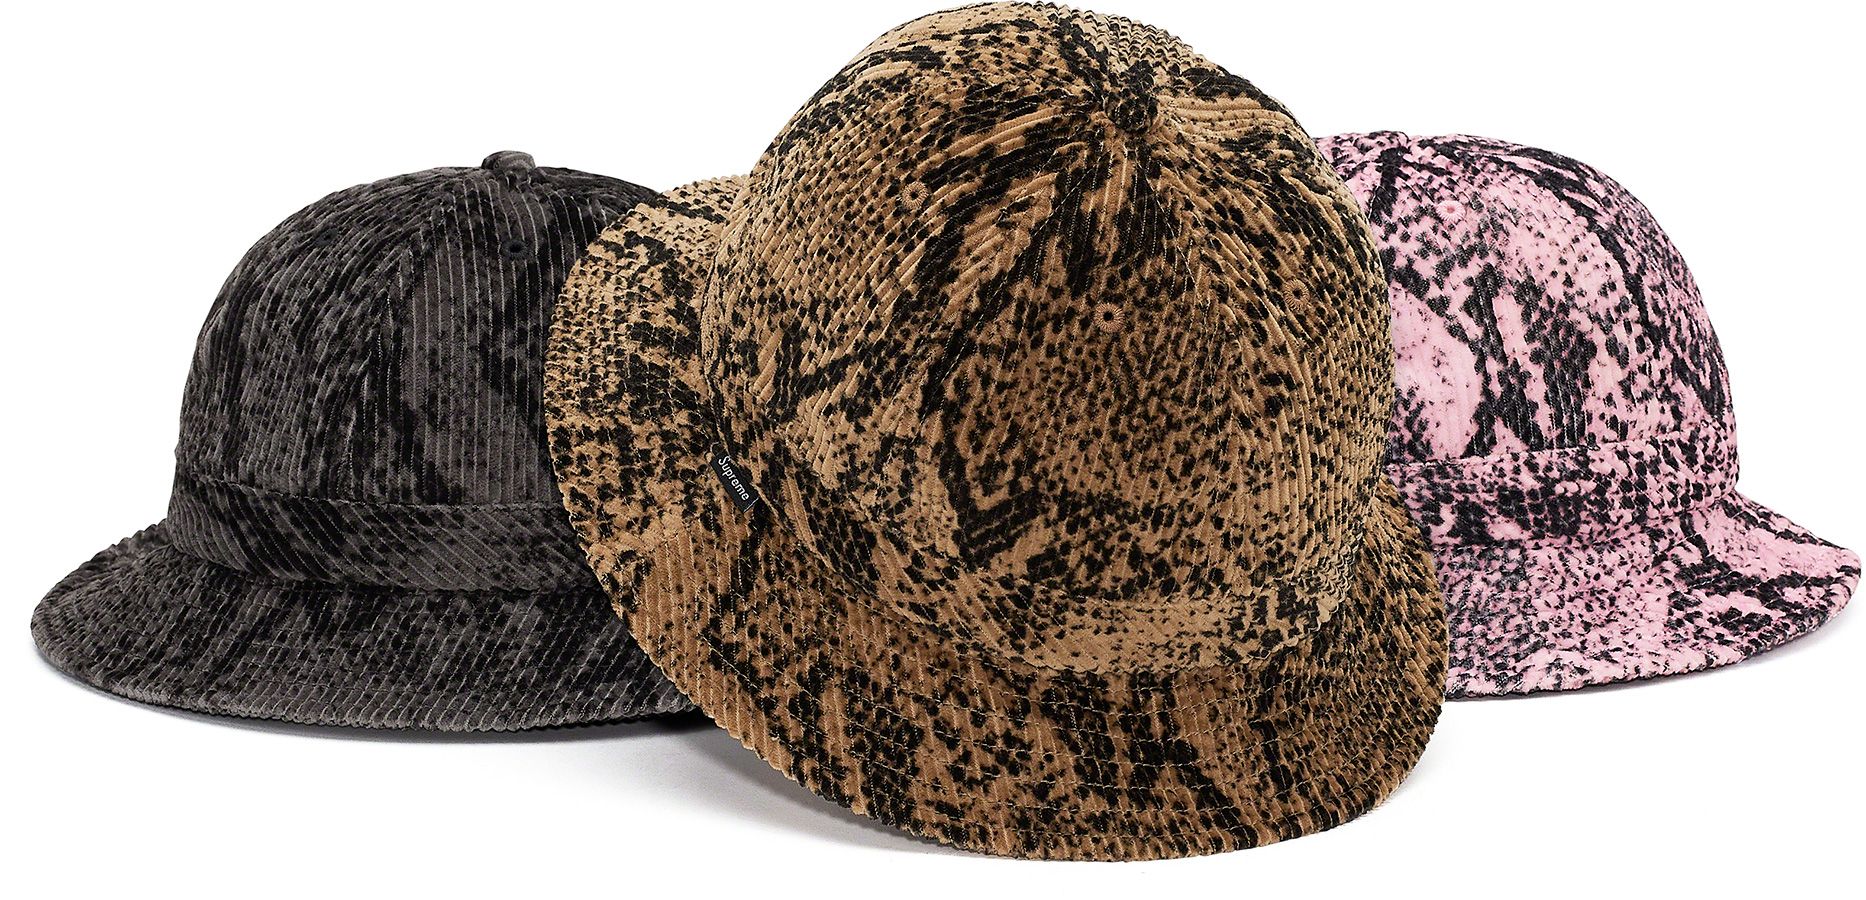 Snakeskin Corduroy Camp Cap - Fall/Winter 2020 Preview – Supreme